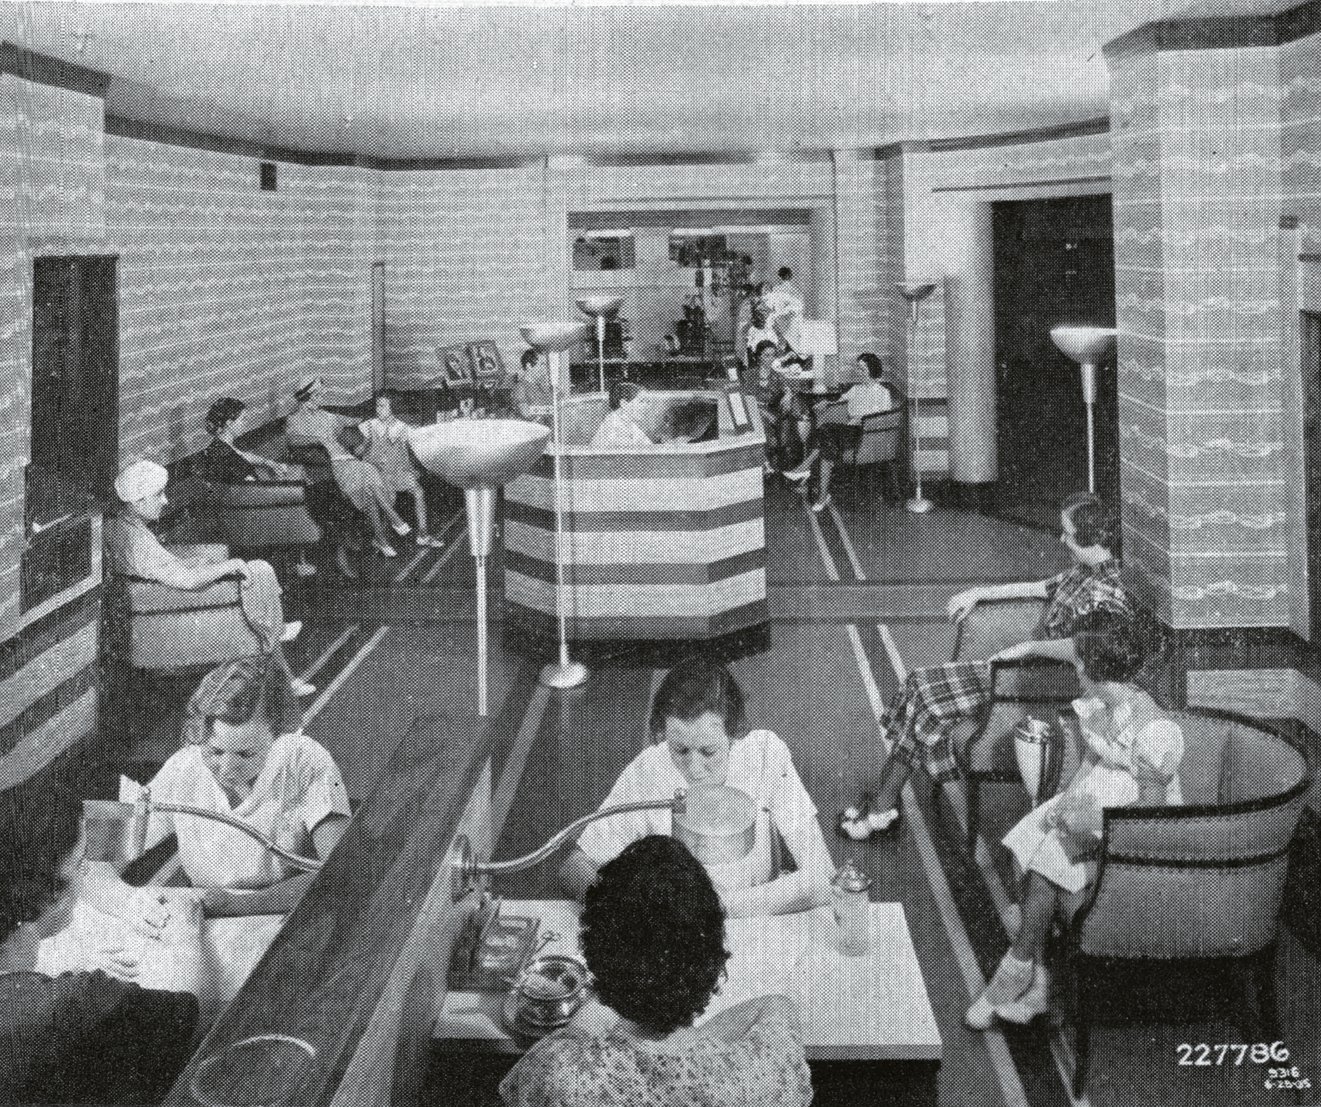 The Beauty Salon of Boggs and Buhl Department Store in Pittsburgh PA grew its clientele with the help of an air conditioning